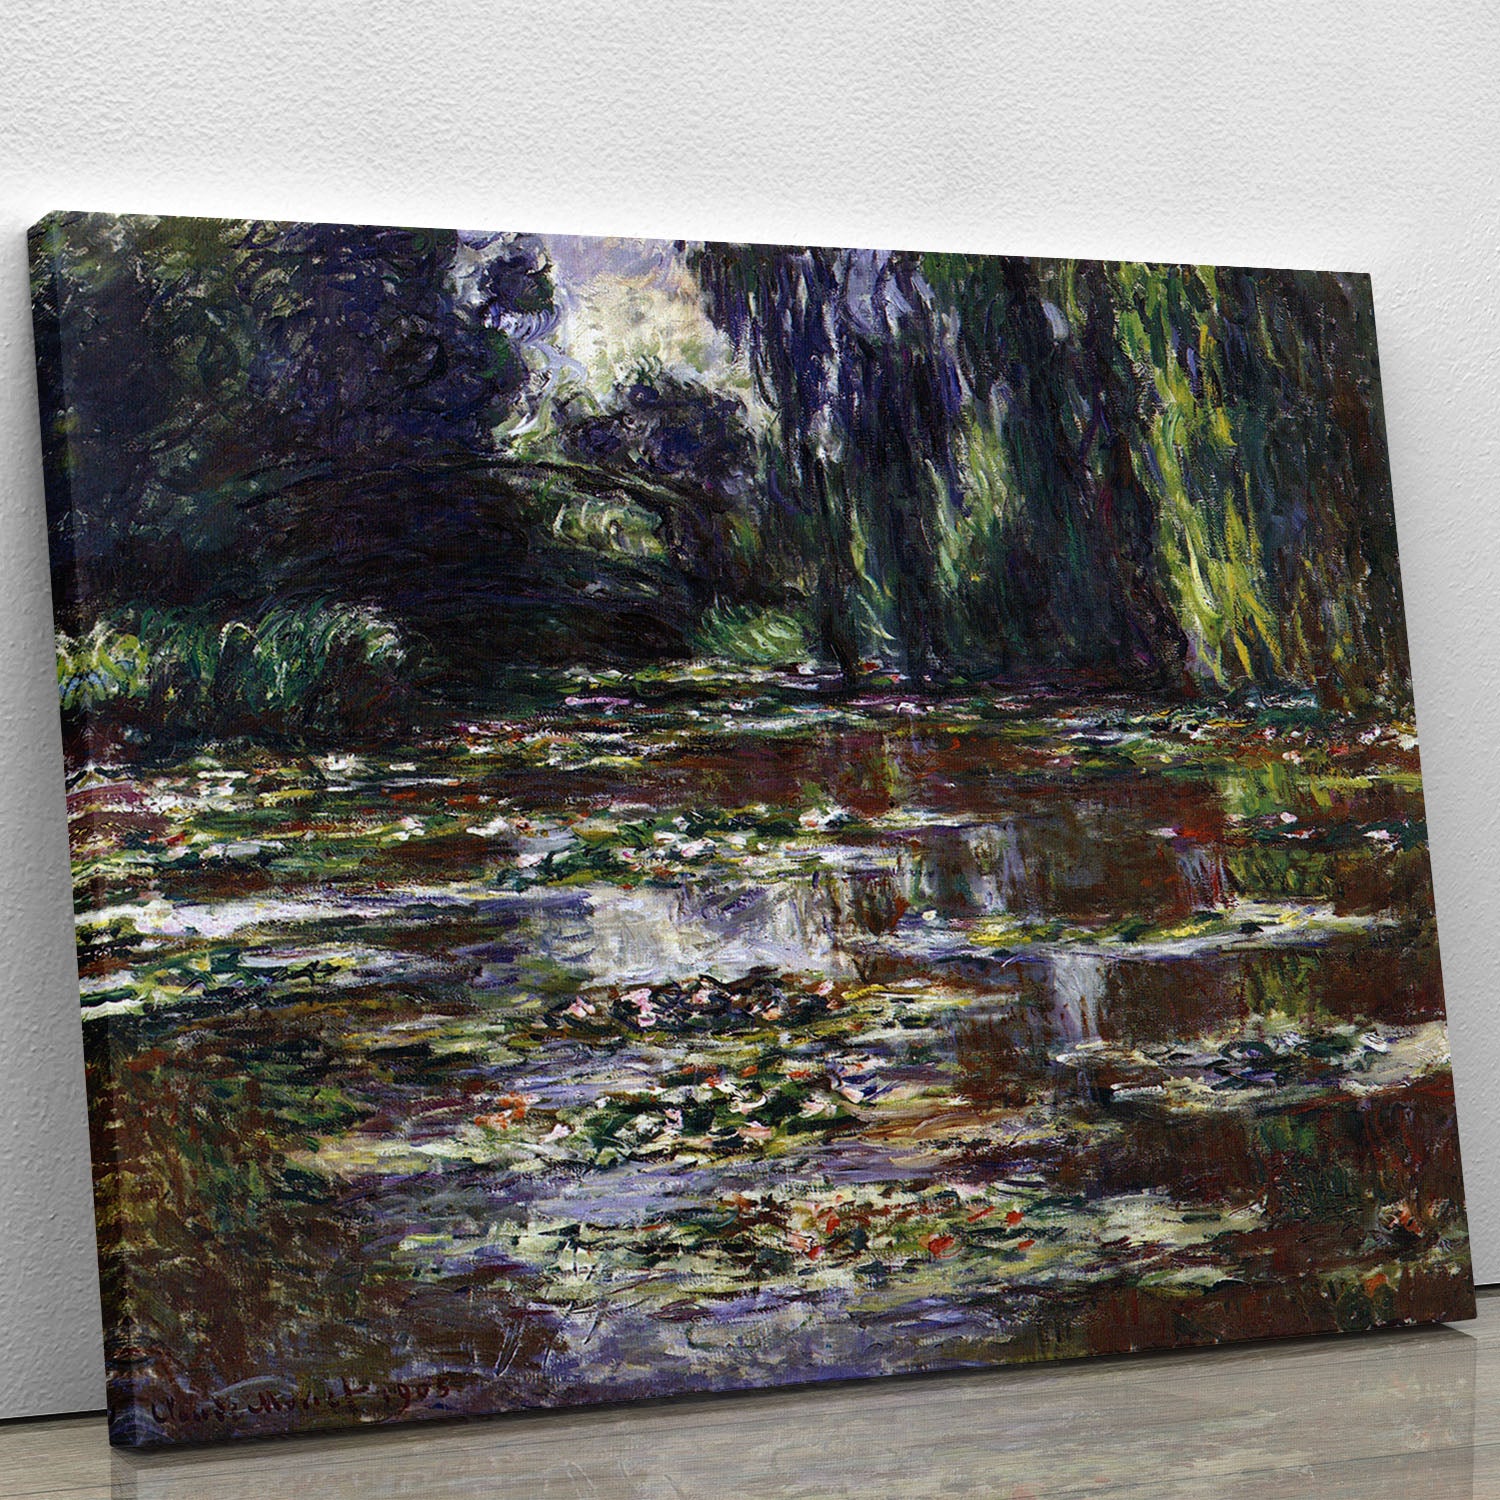 Water lilies water landscape 3 by Monet Canvas Print or Poster - Canvas Art Rocks - 1